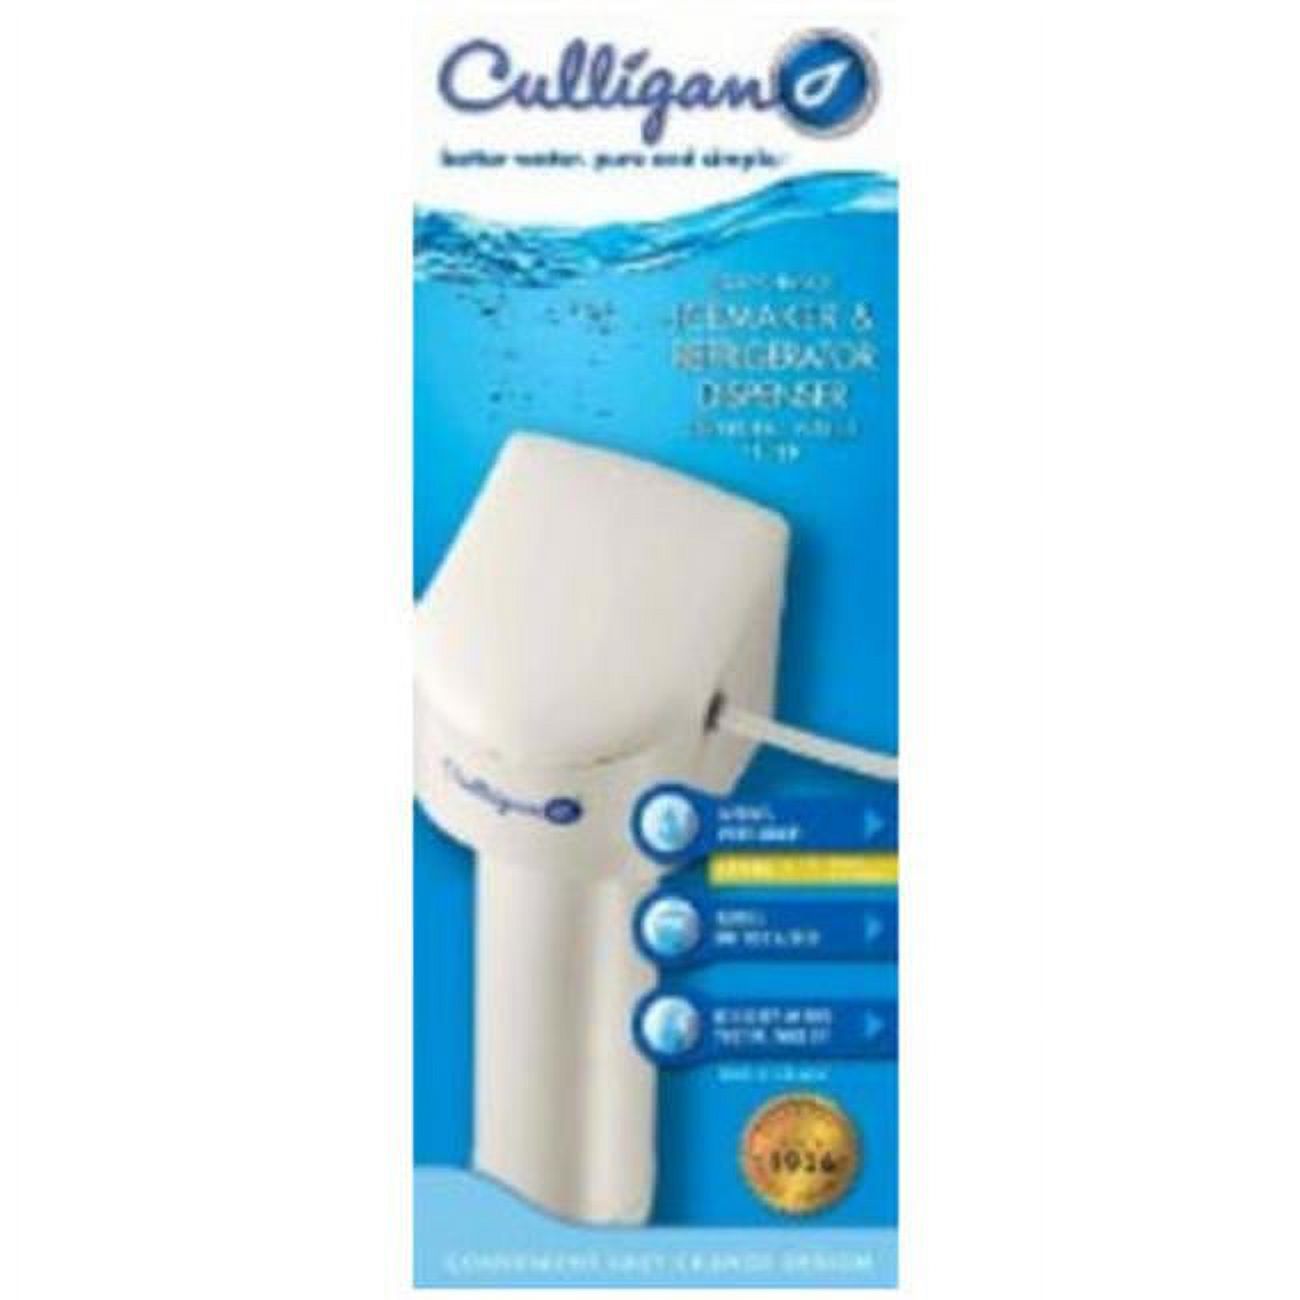 Culligan IC-EZ-1 Easy Change Water Filter System - image 1 of 4